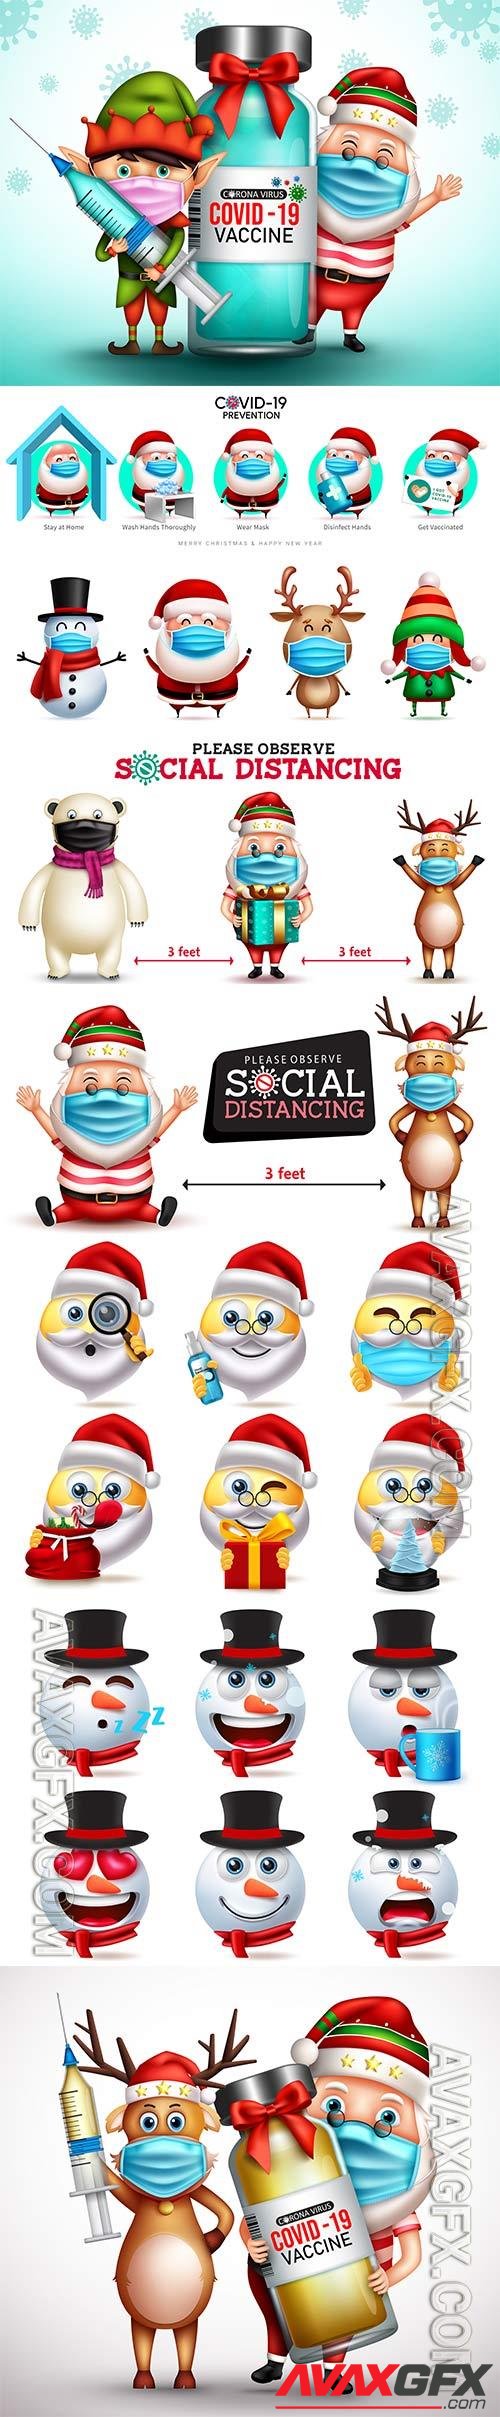 Christmas vaccine vector design christmas 3d santa claus and elf characters vector